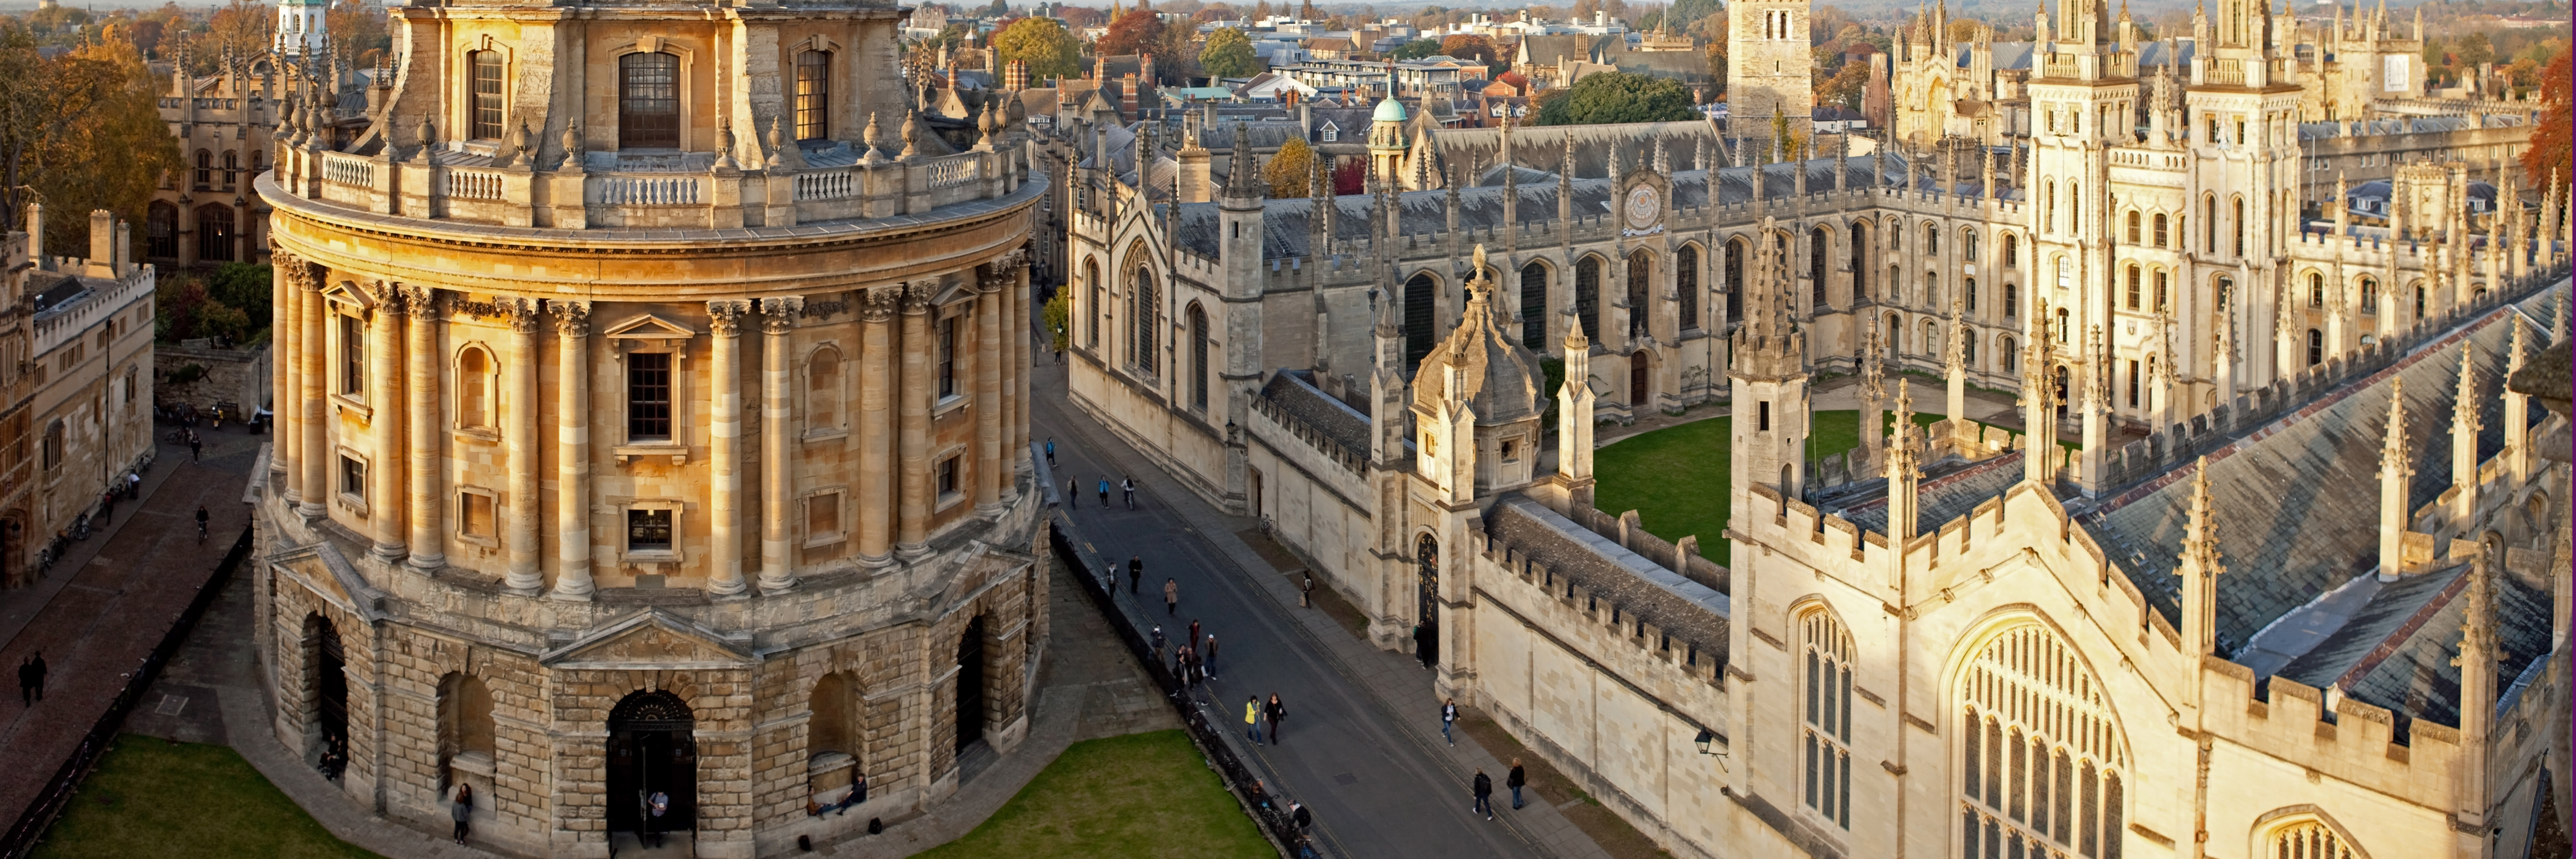 Radcliffe Square Oxford in the autumn seen from above